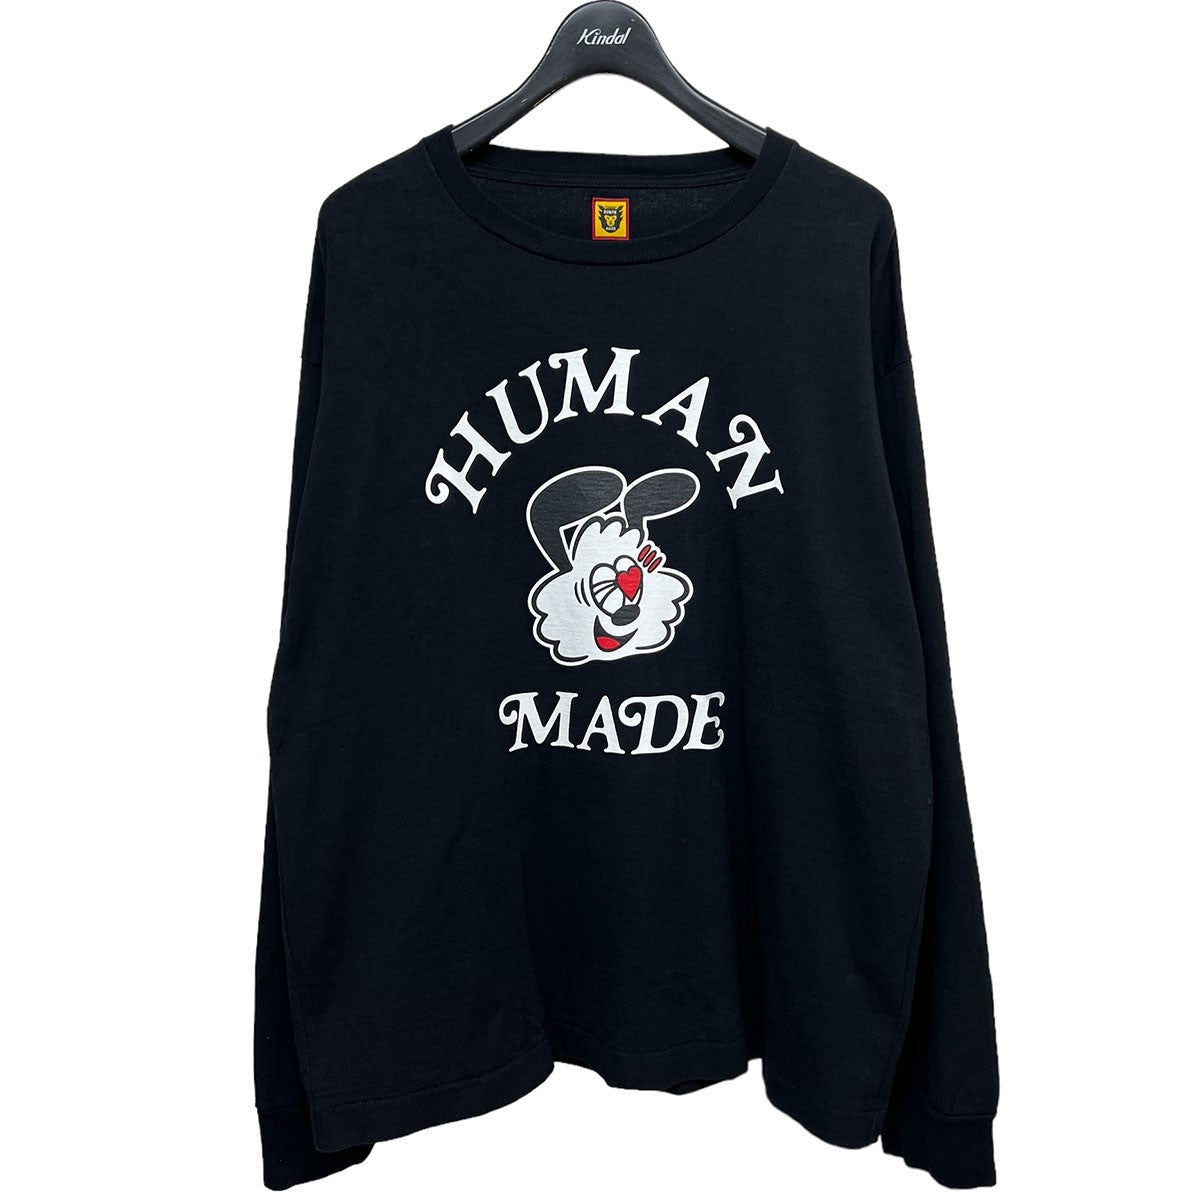 HUMAN MADE×GIRLS DON'T CRY VALENTINE L／S TEE プリントロング ...